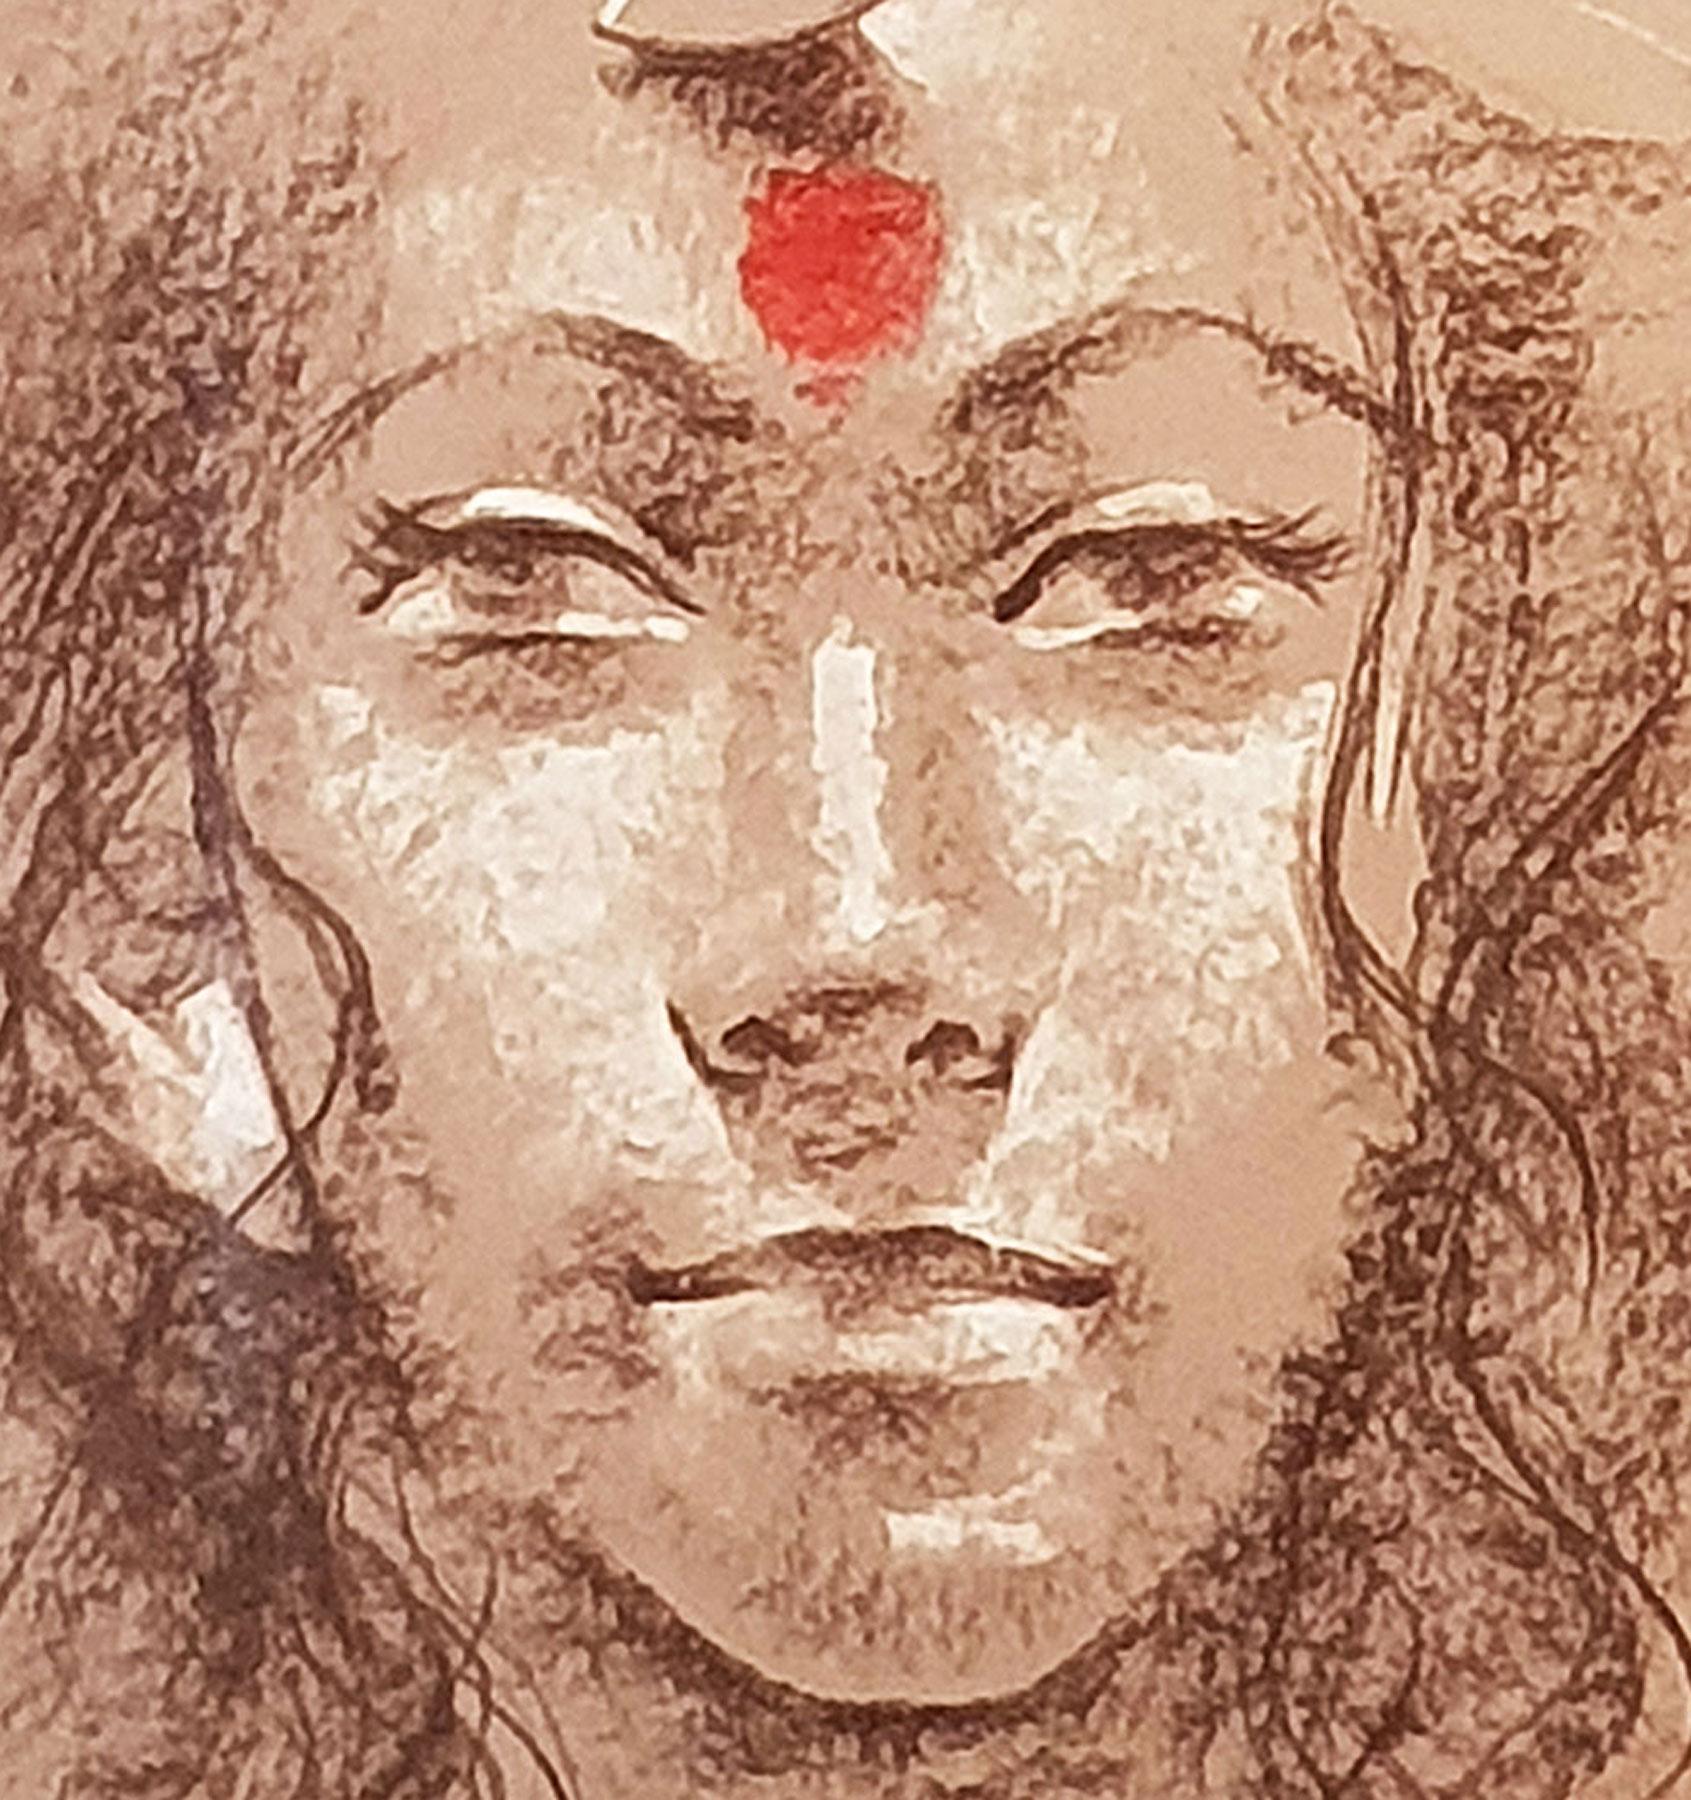 Sanatan Dinda - DEVI - 11 x 8.5 inches (unframed size)
Conte on acid free paper.
Inclusive of shipment in roll form. 

Style : Sanatan Dinda discovers the beautiful a midst the ruins of a dilapidated city; his work becomes lyrical while he puts his